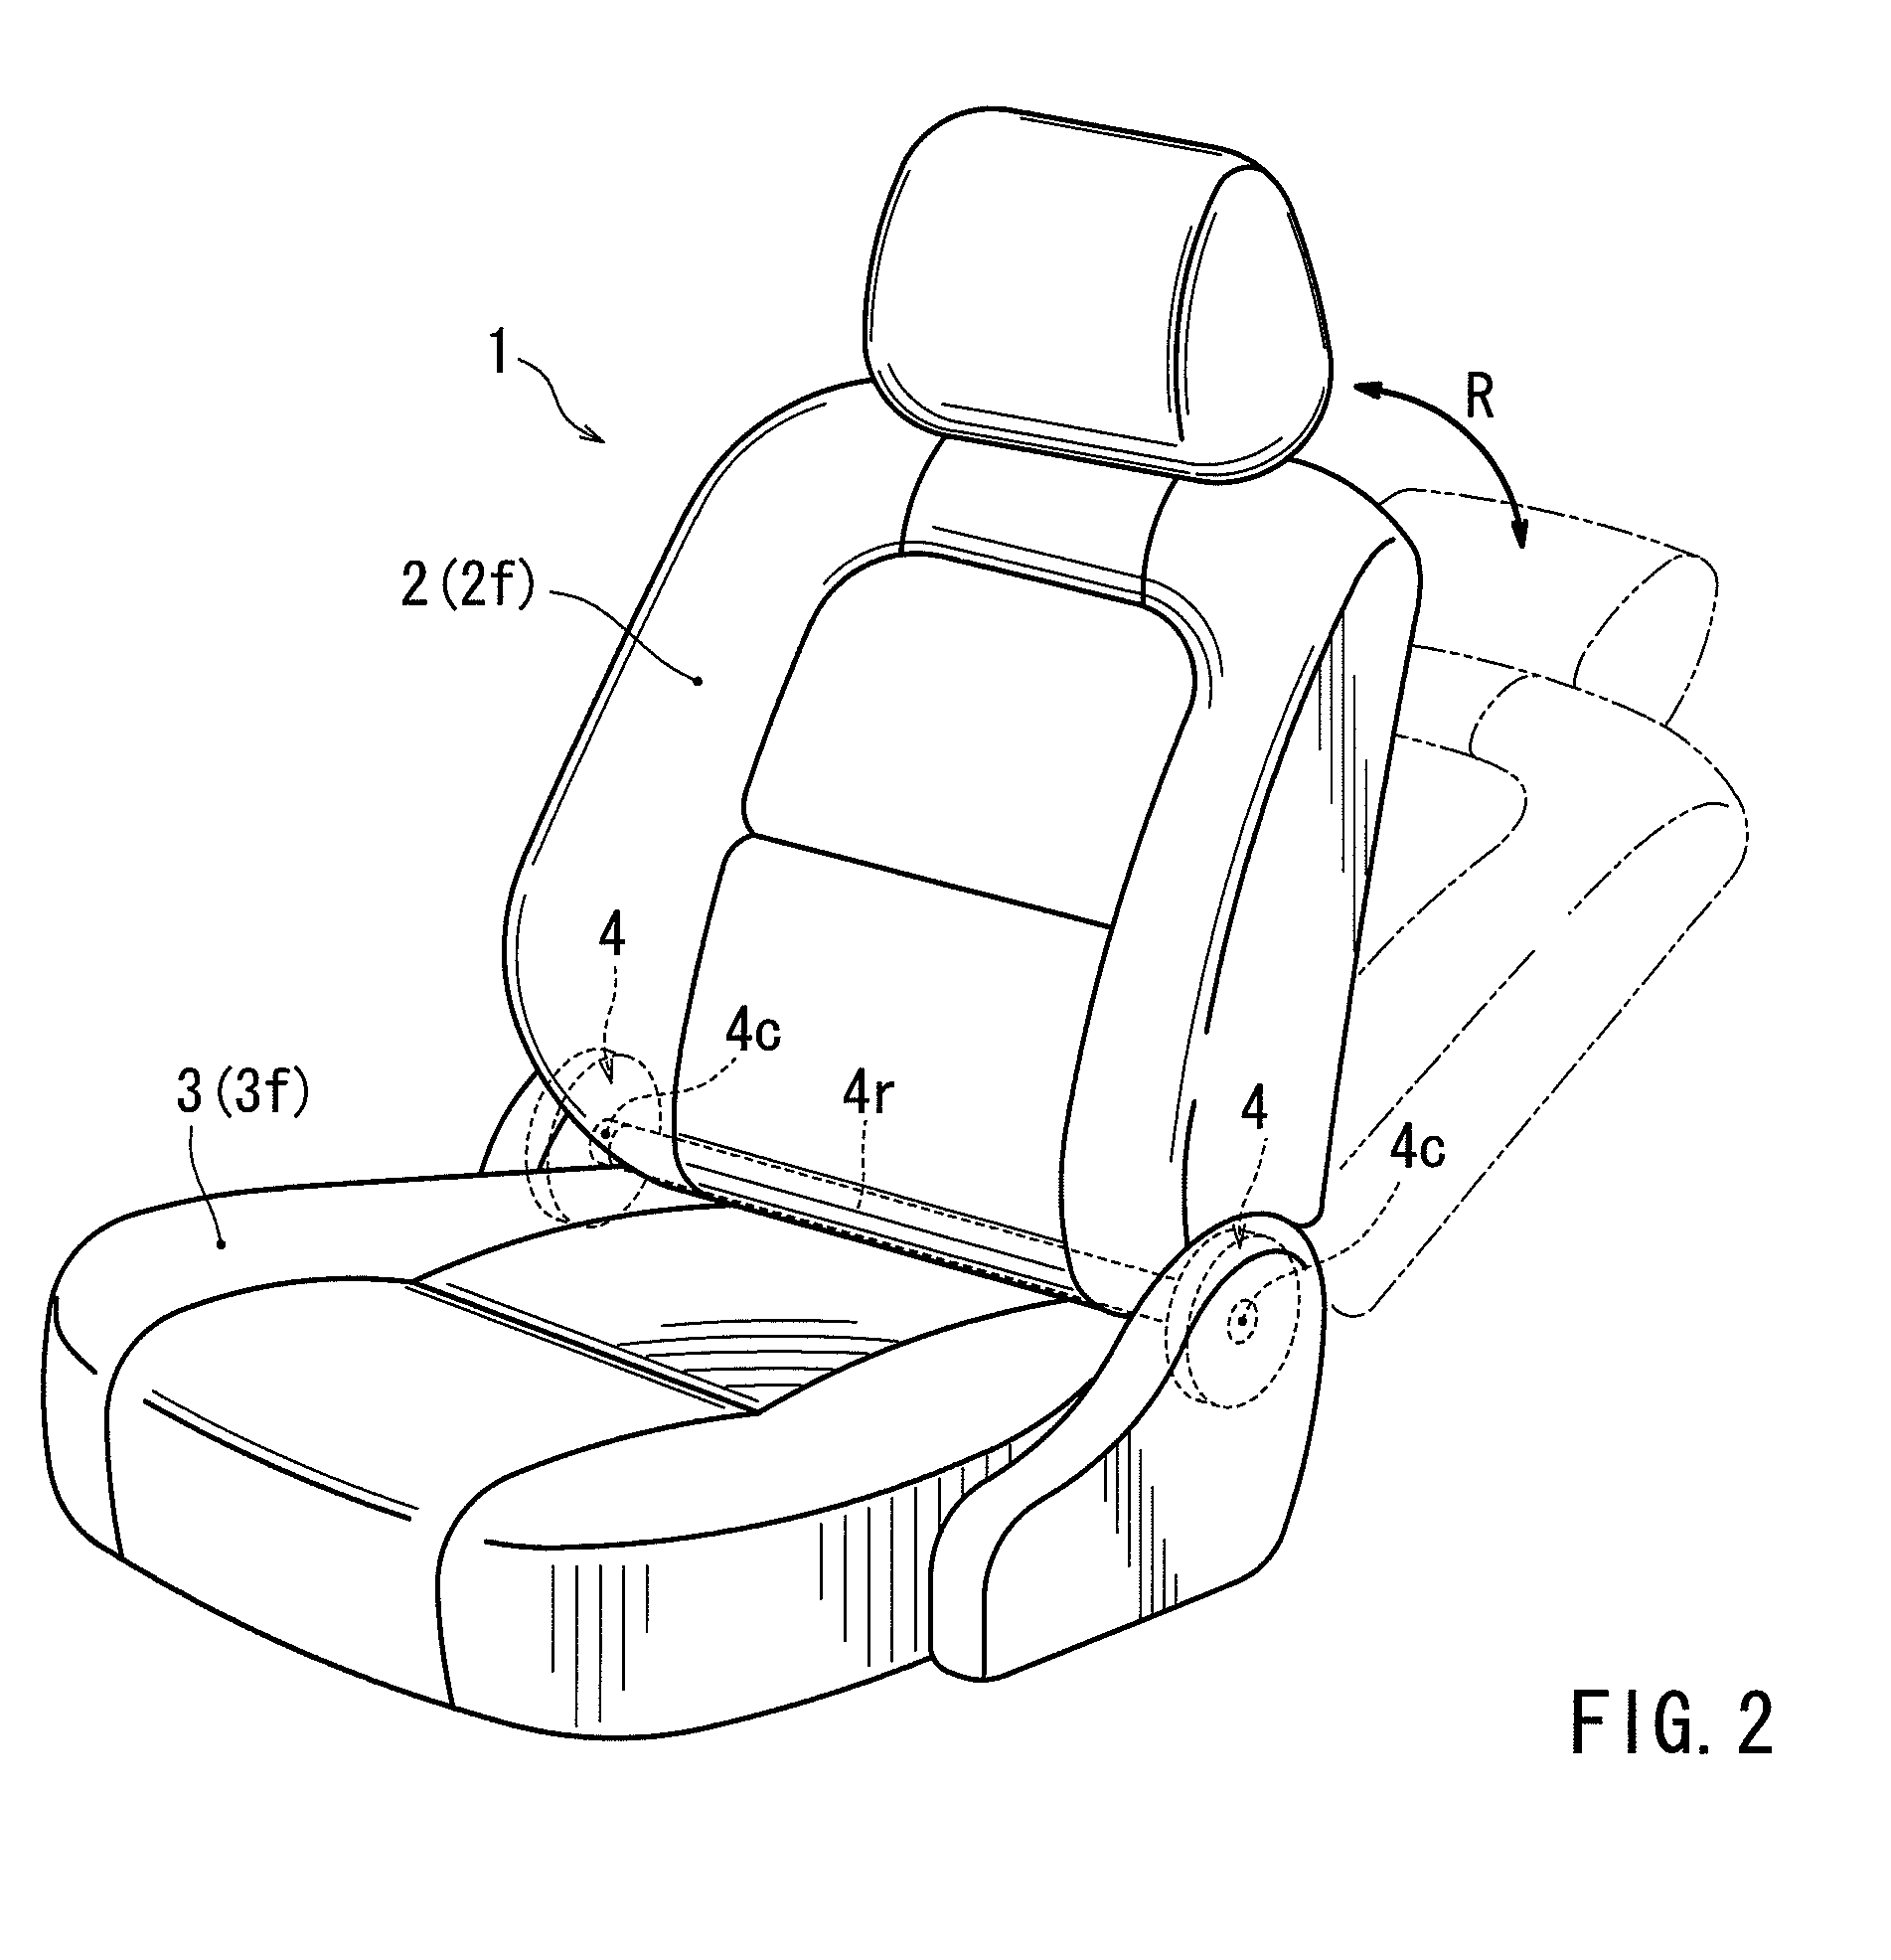 Connection devices in vehicle seats